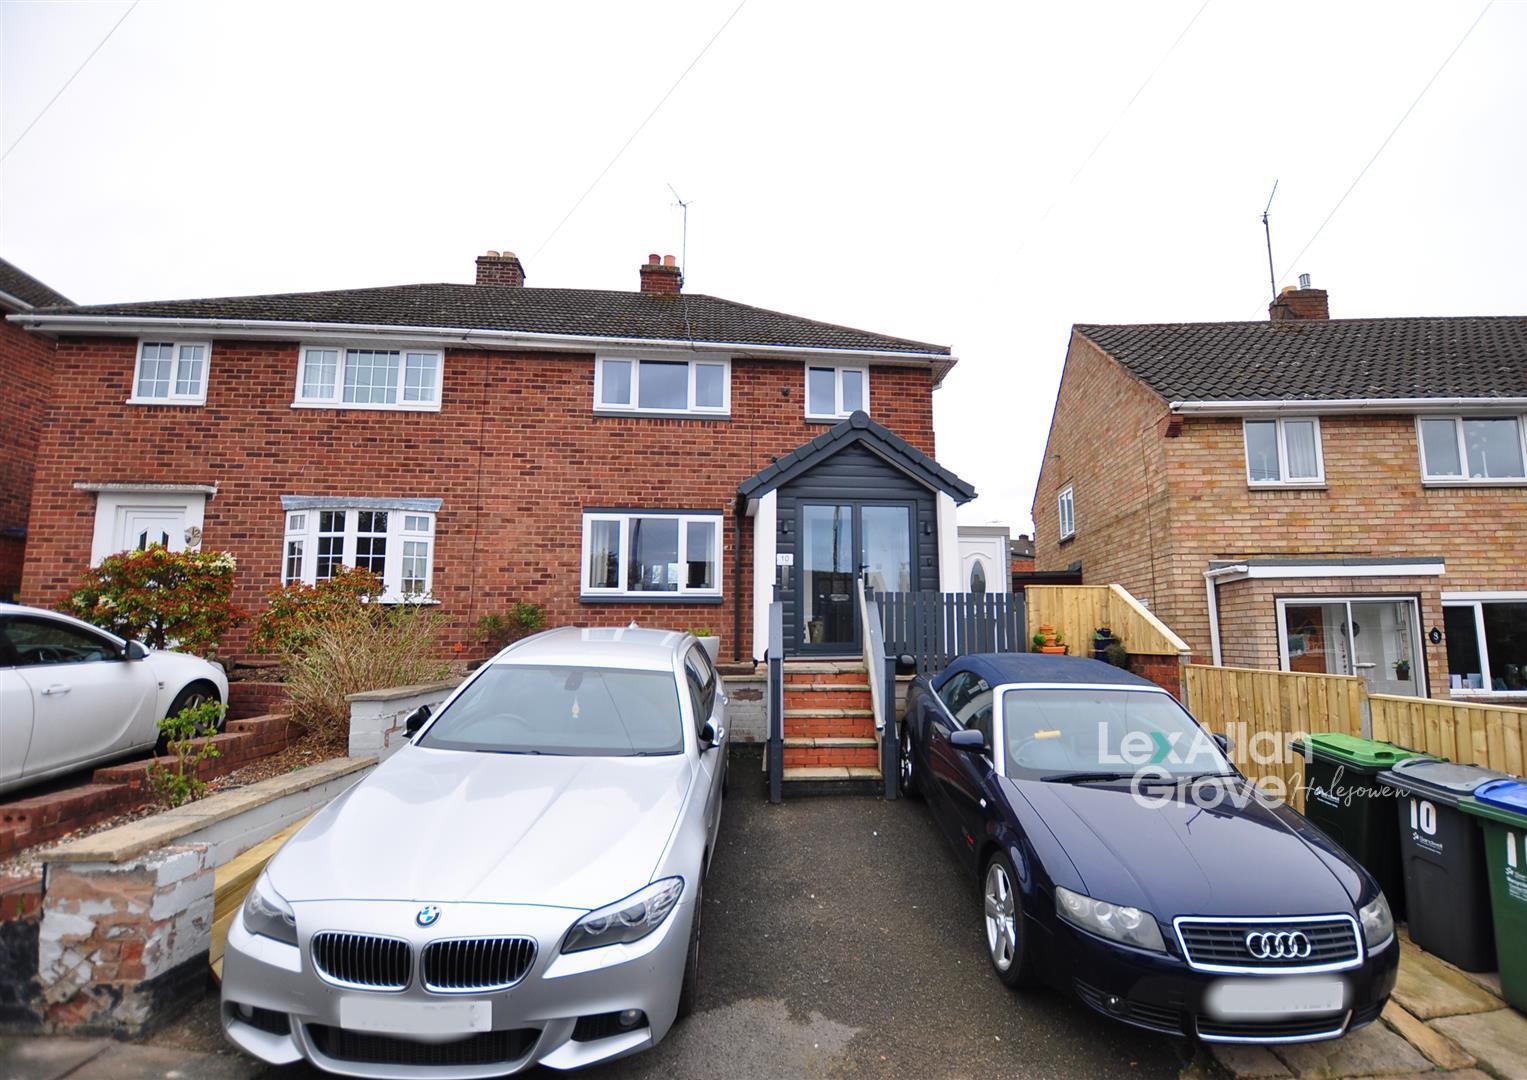 3 bed  for sale in Norwood Avenue, Cradley Heath, B64 